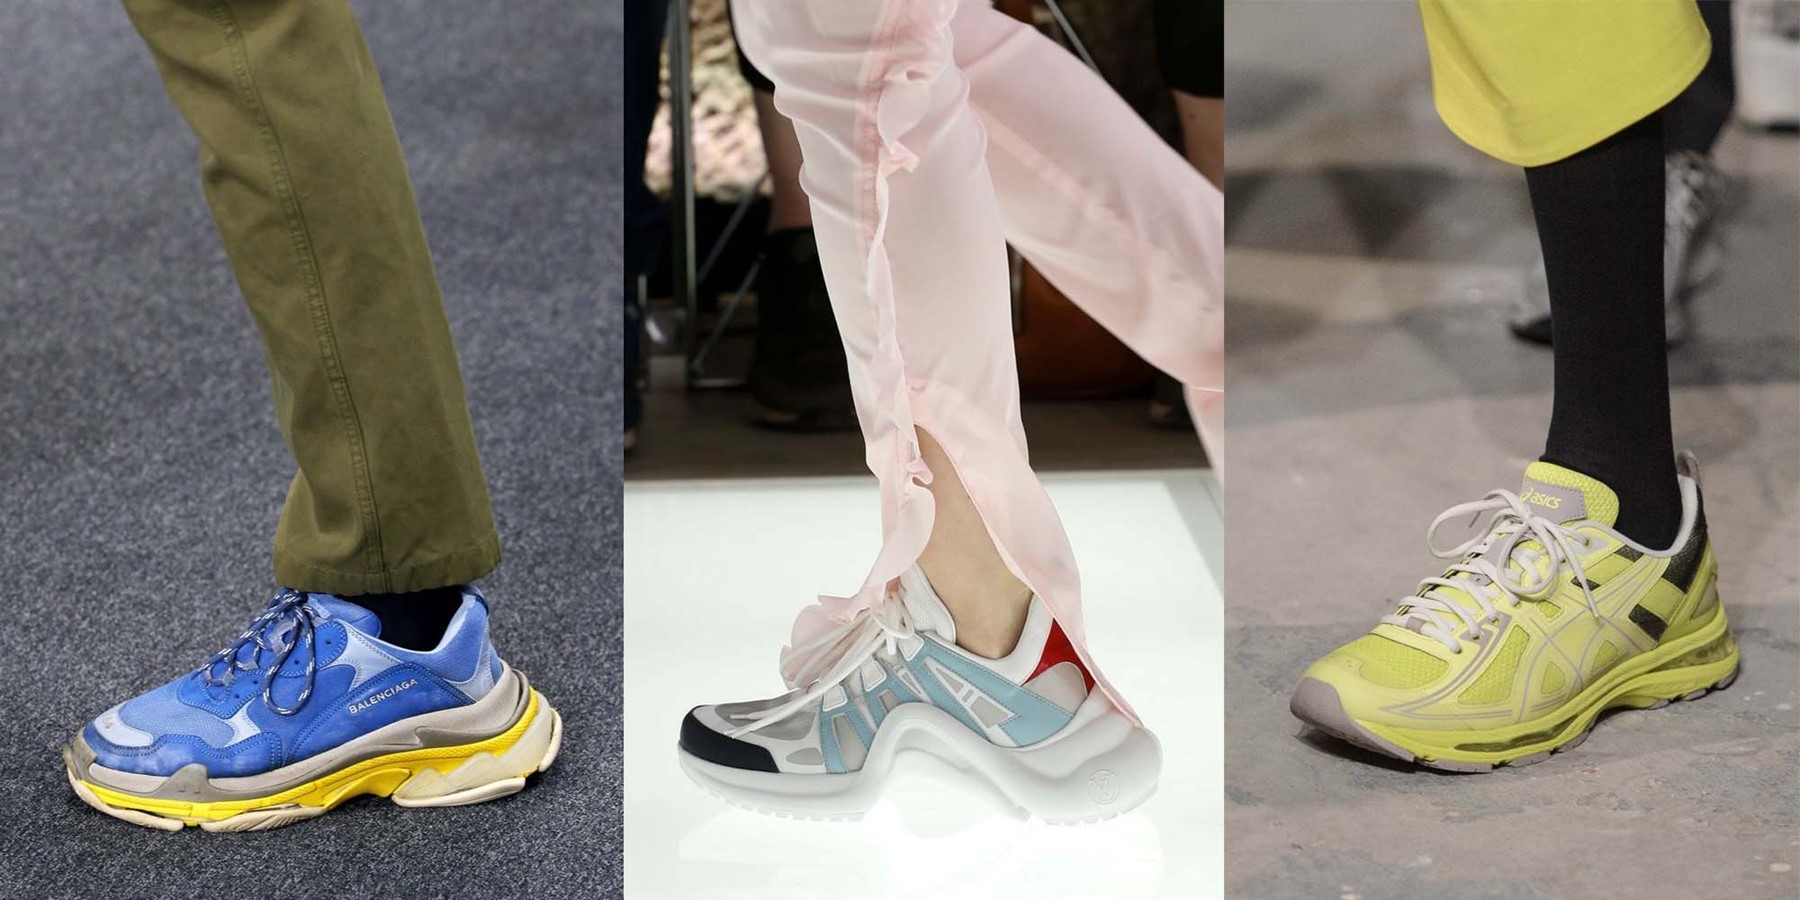 What a Croc Why has Balenciaga ruined the worlds most practical shoes   Life and style  The Guardian